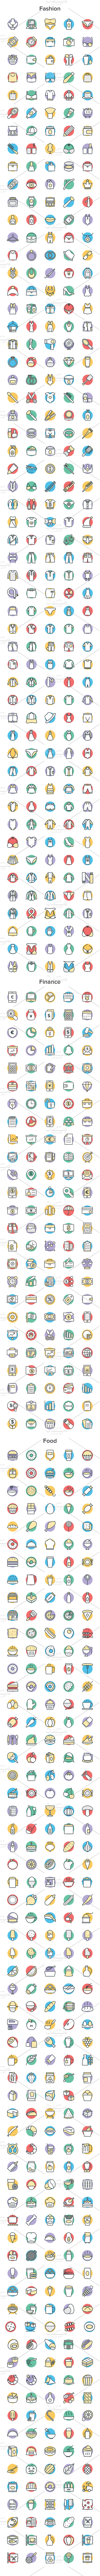 2900+ Cool Vector Icon Sets Bundle in Communication Icons - product preview 2